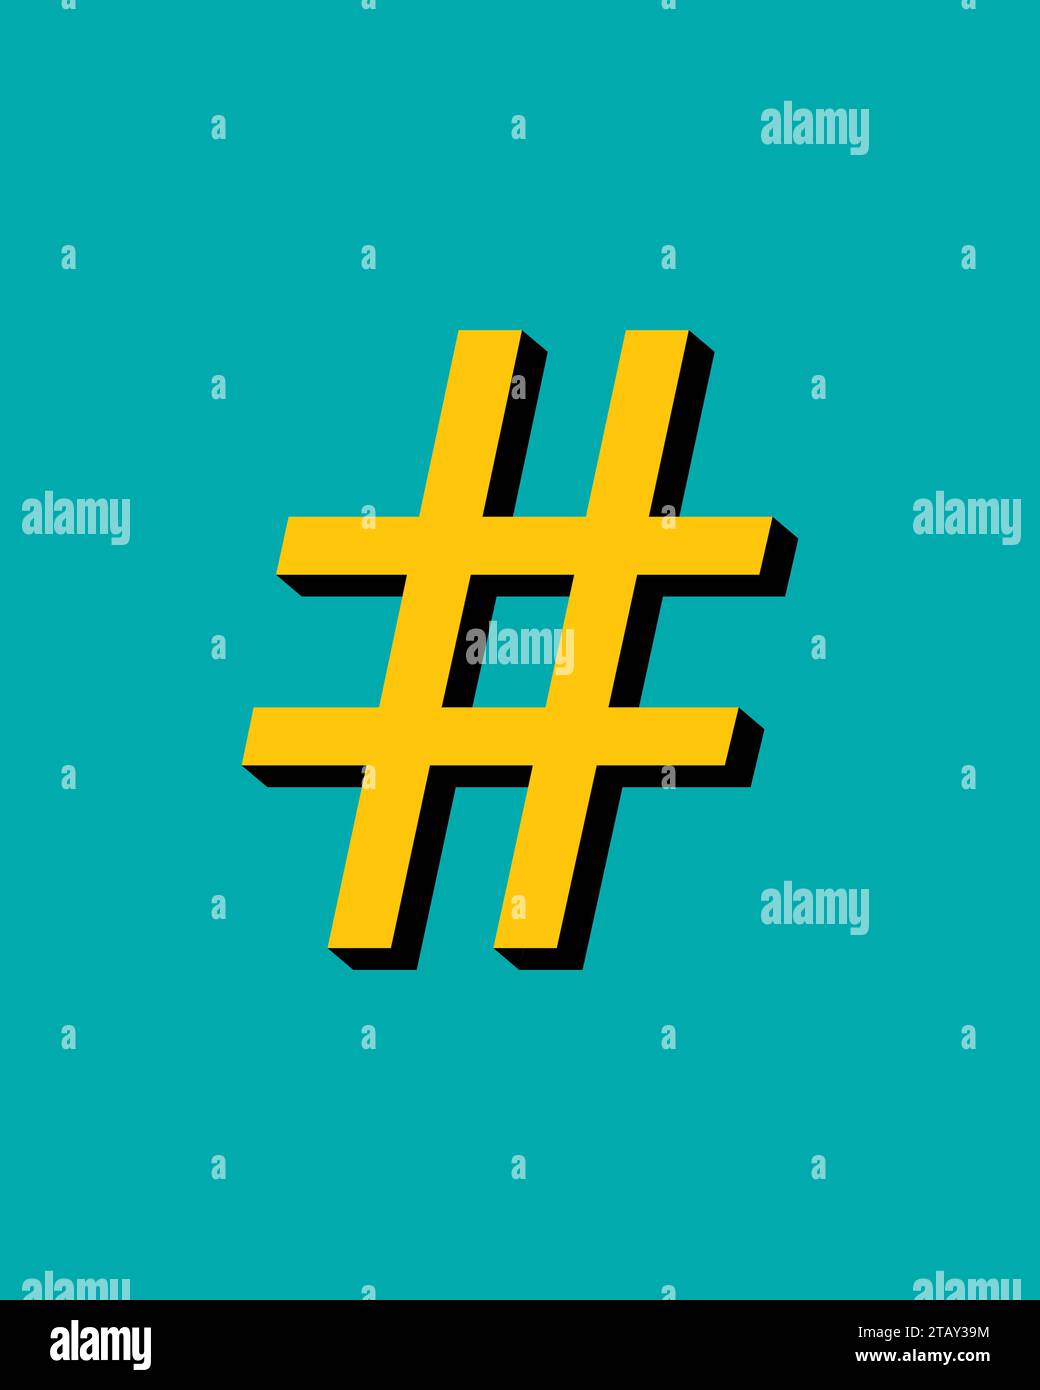 hashtag logo icon with shadow isolated on blue background Stock Vector